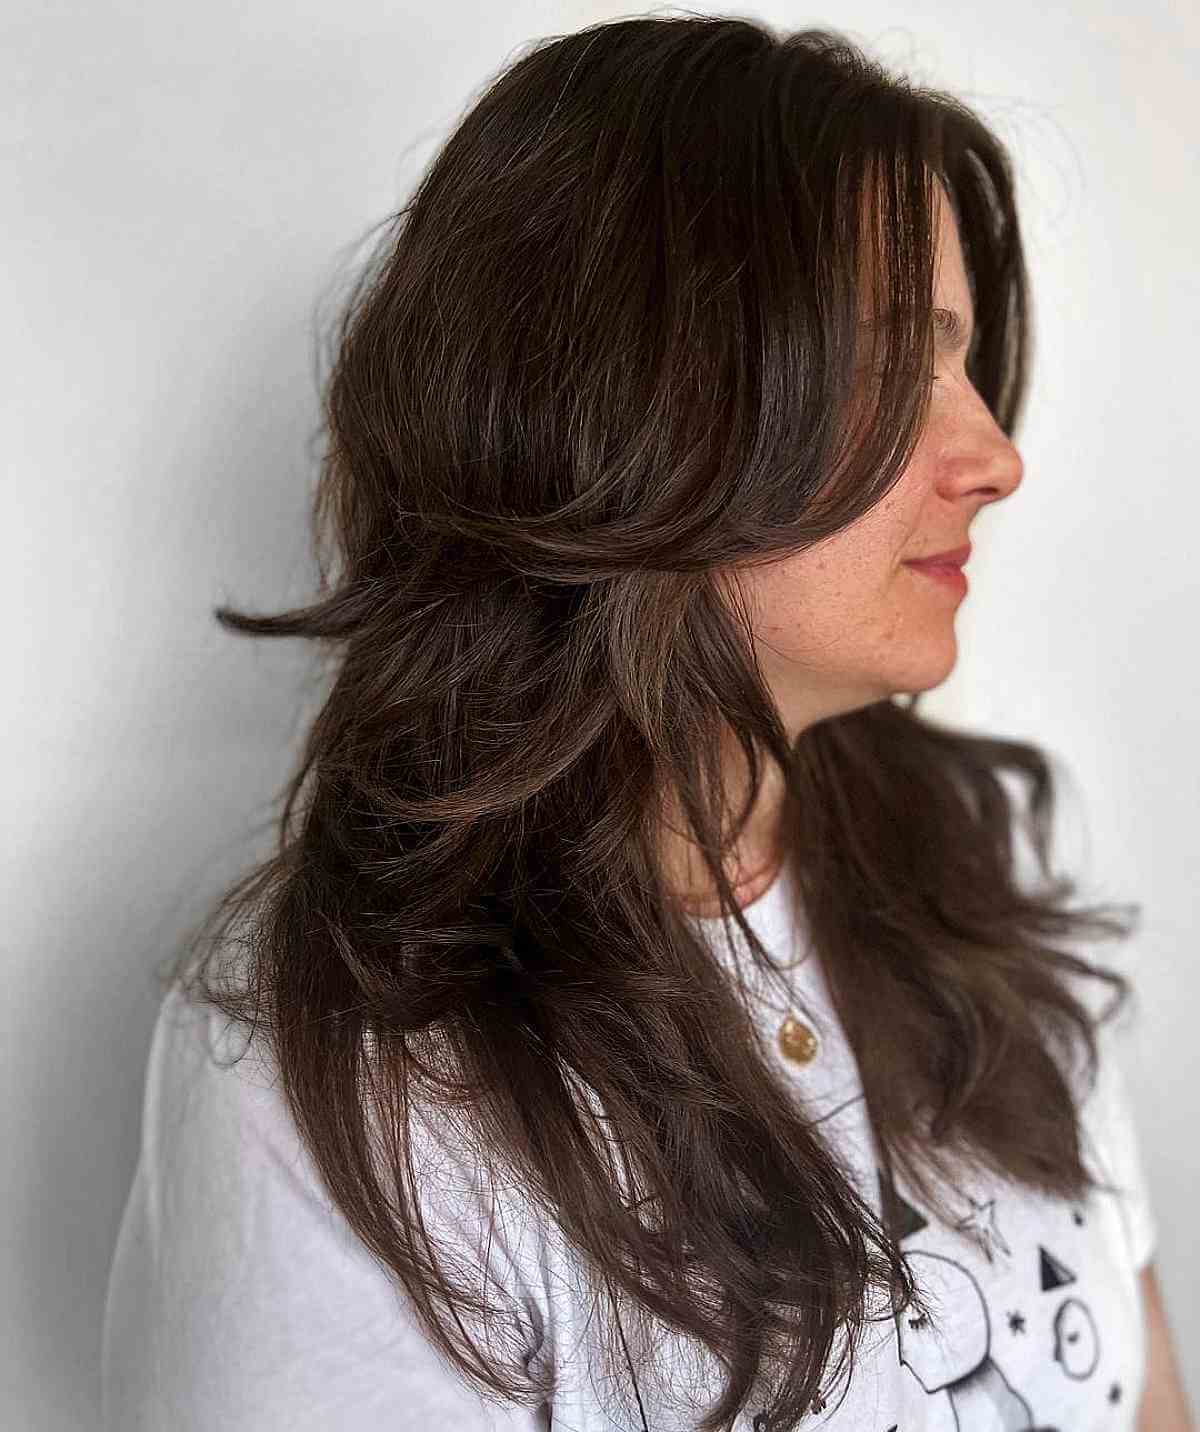 Feathered Layers on Shagged Hair on a Woman in Her 40s